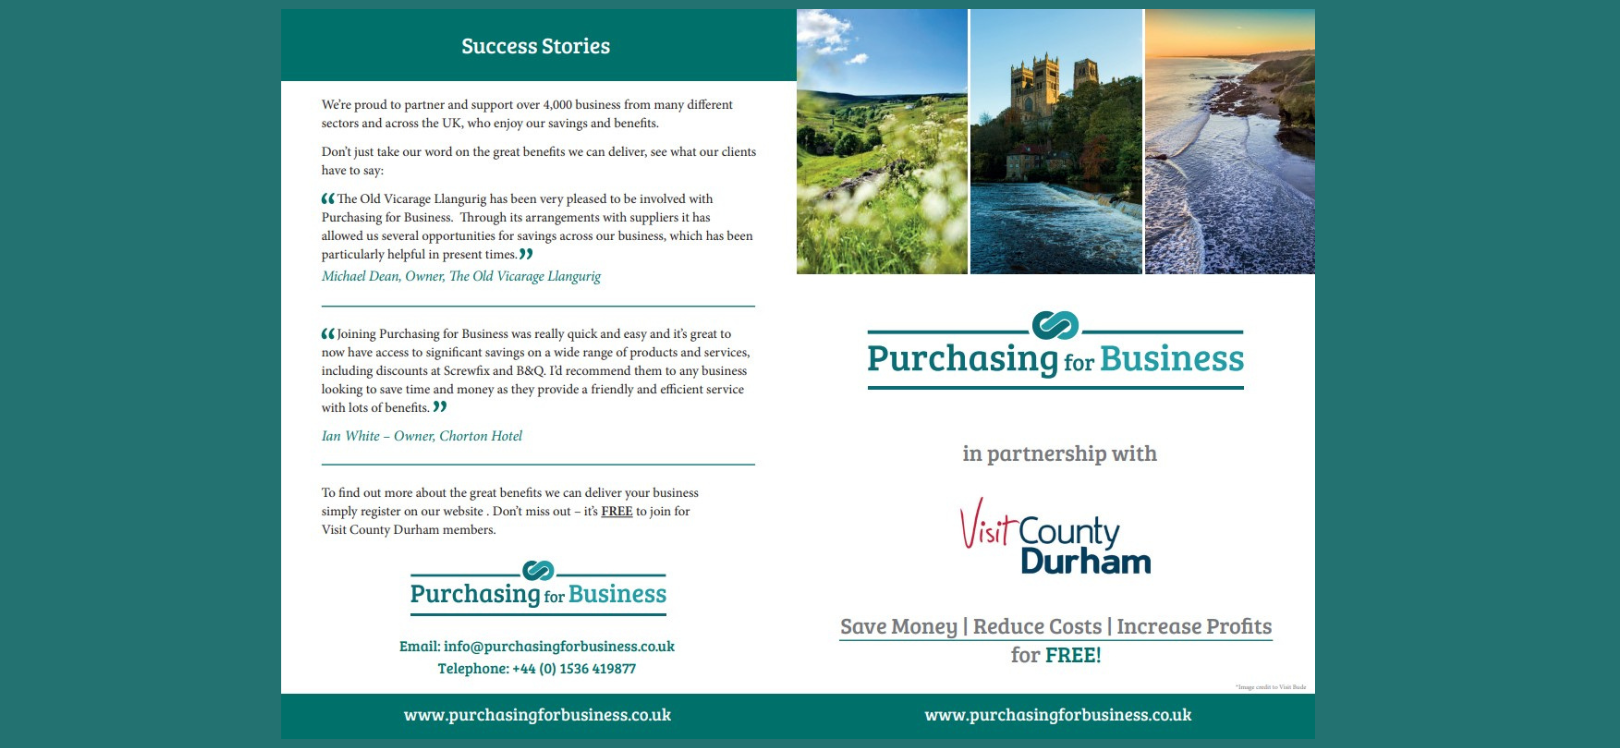 Leaflet information about Purchasing for Business